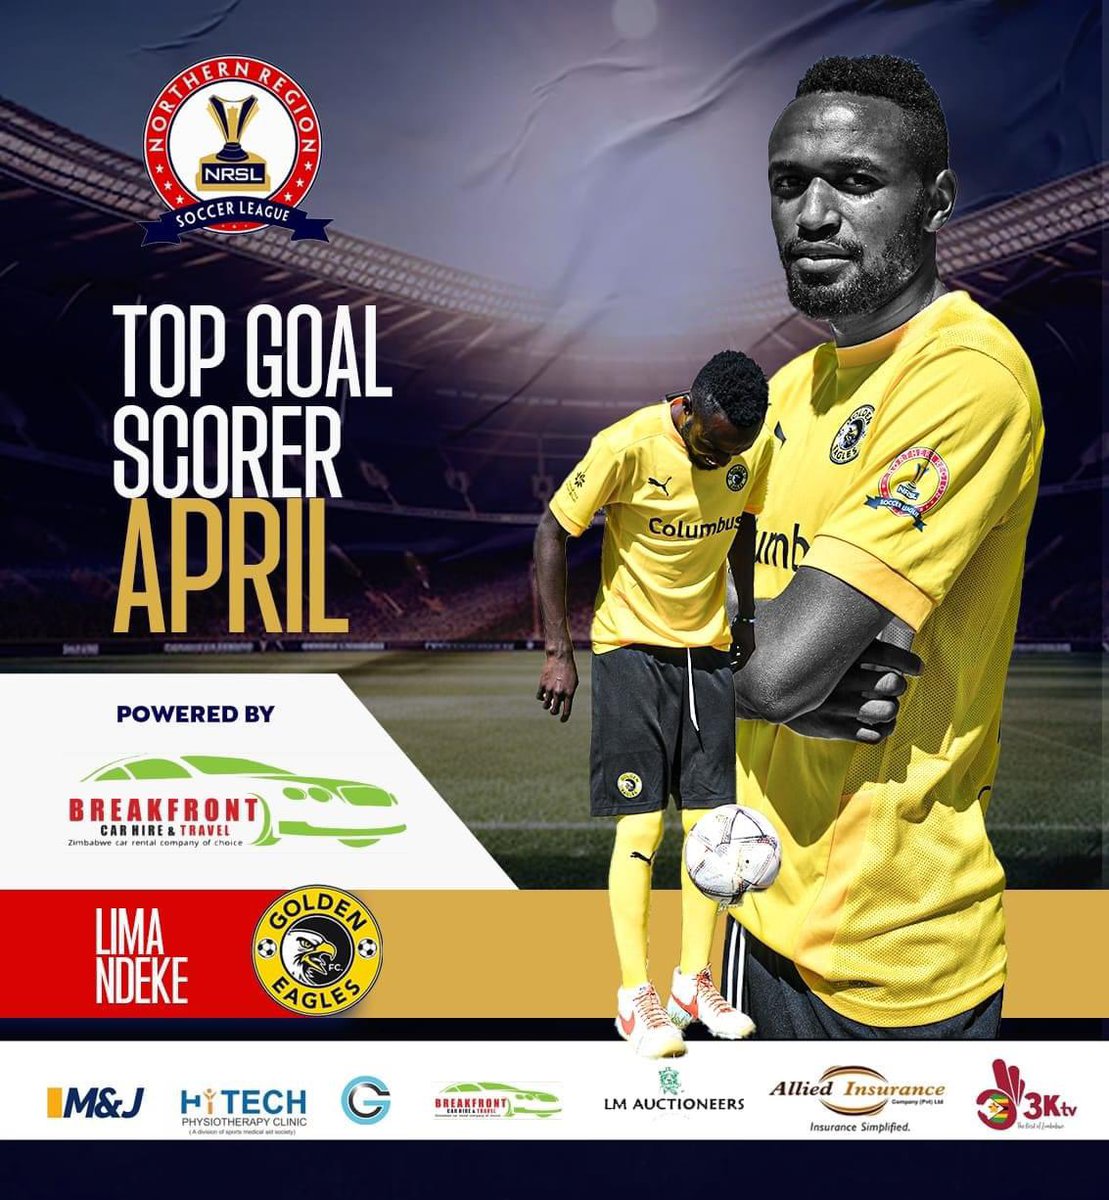 Congratulations to our Congolese import, Lima Ndeke - NRSL Top Goal Scorer for the month of April 🥇 #GondoHarishaye🦅